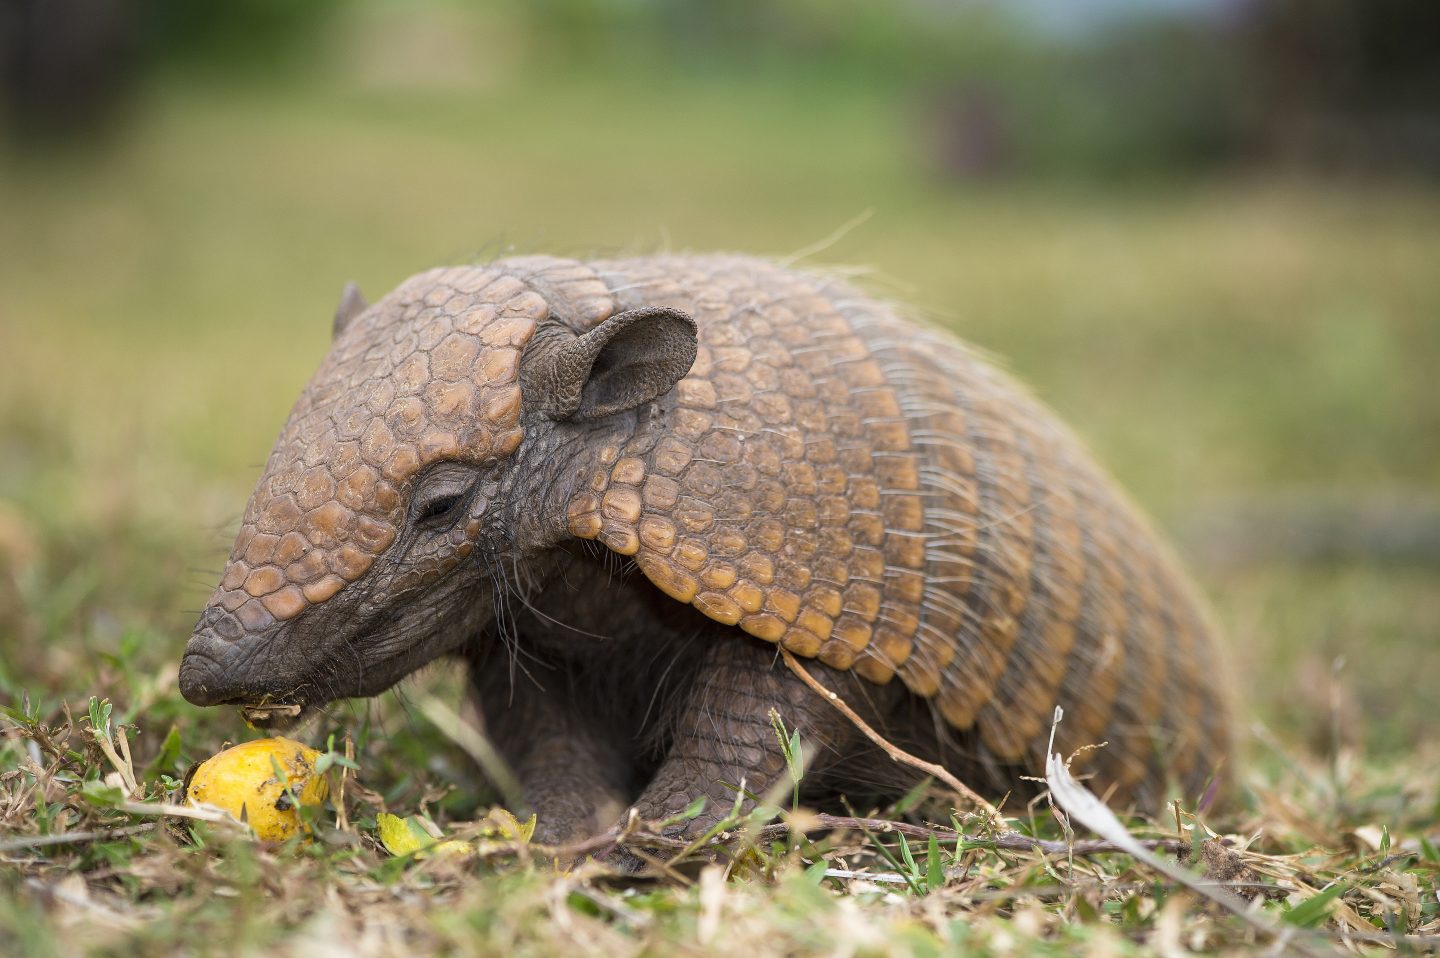 More than 50% of armadillos carry leprosy